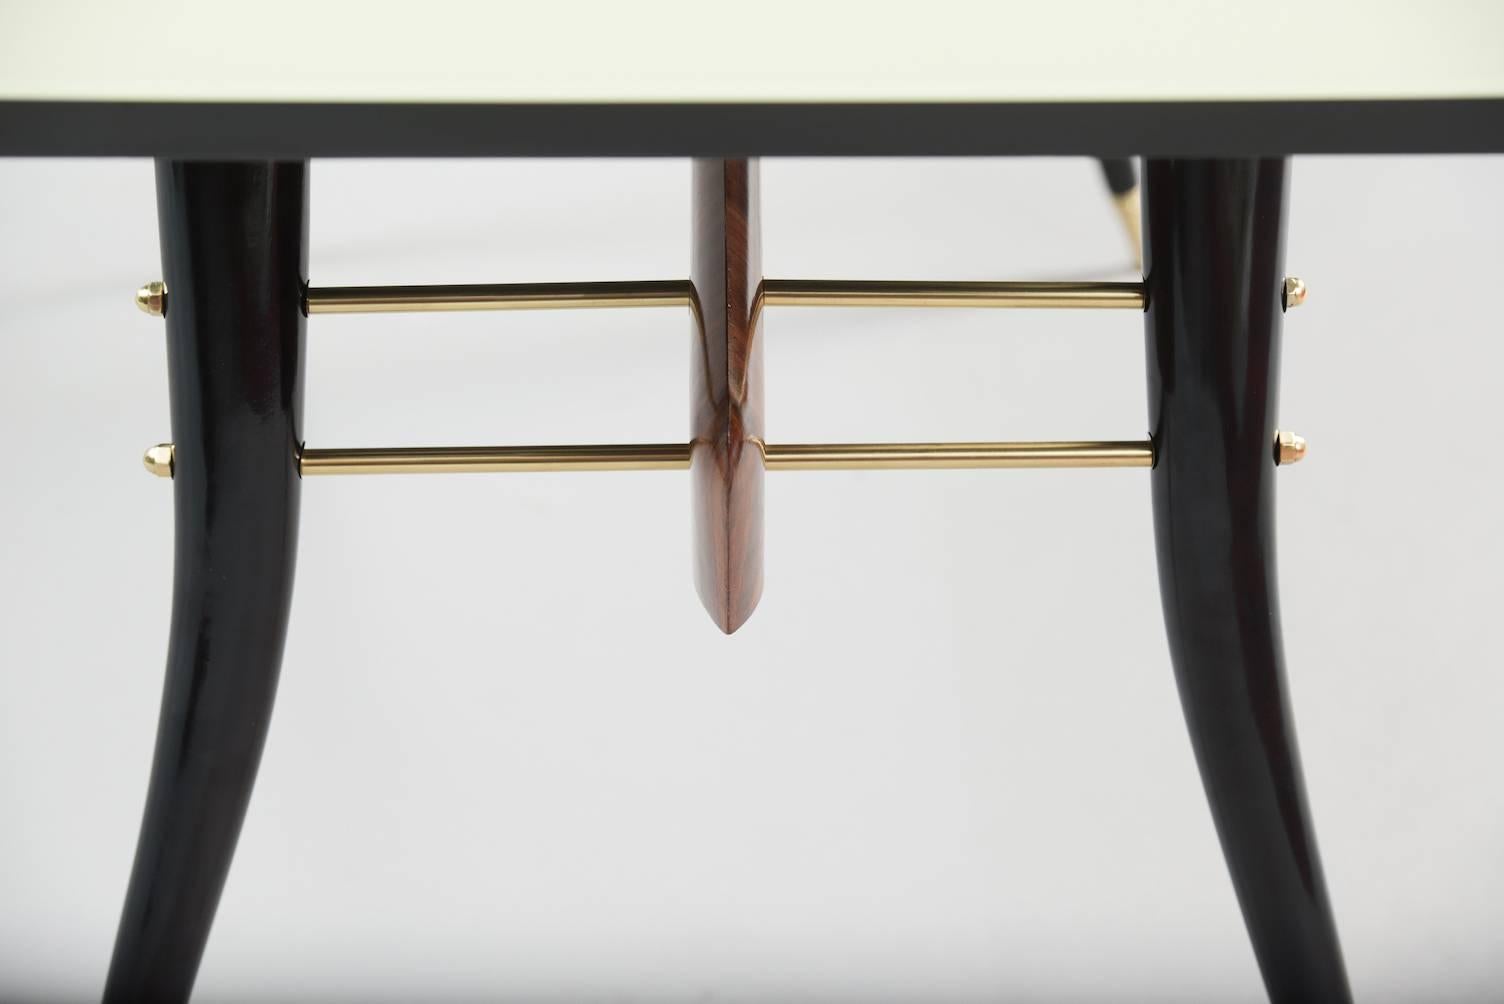 Rosewood and ebonized wood dining table, brass fittings and lacquered glass top.